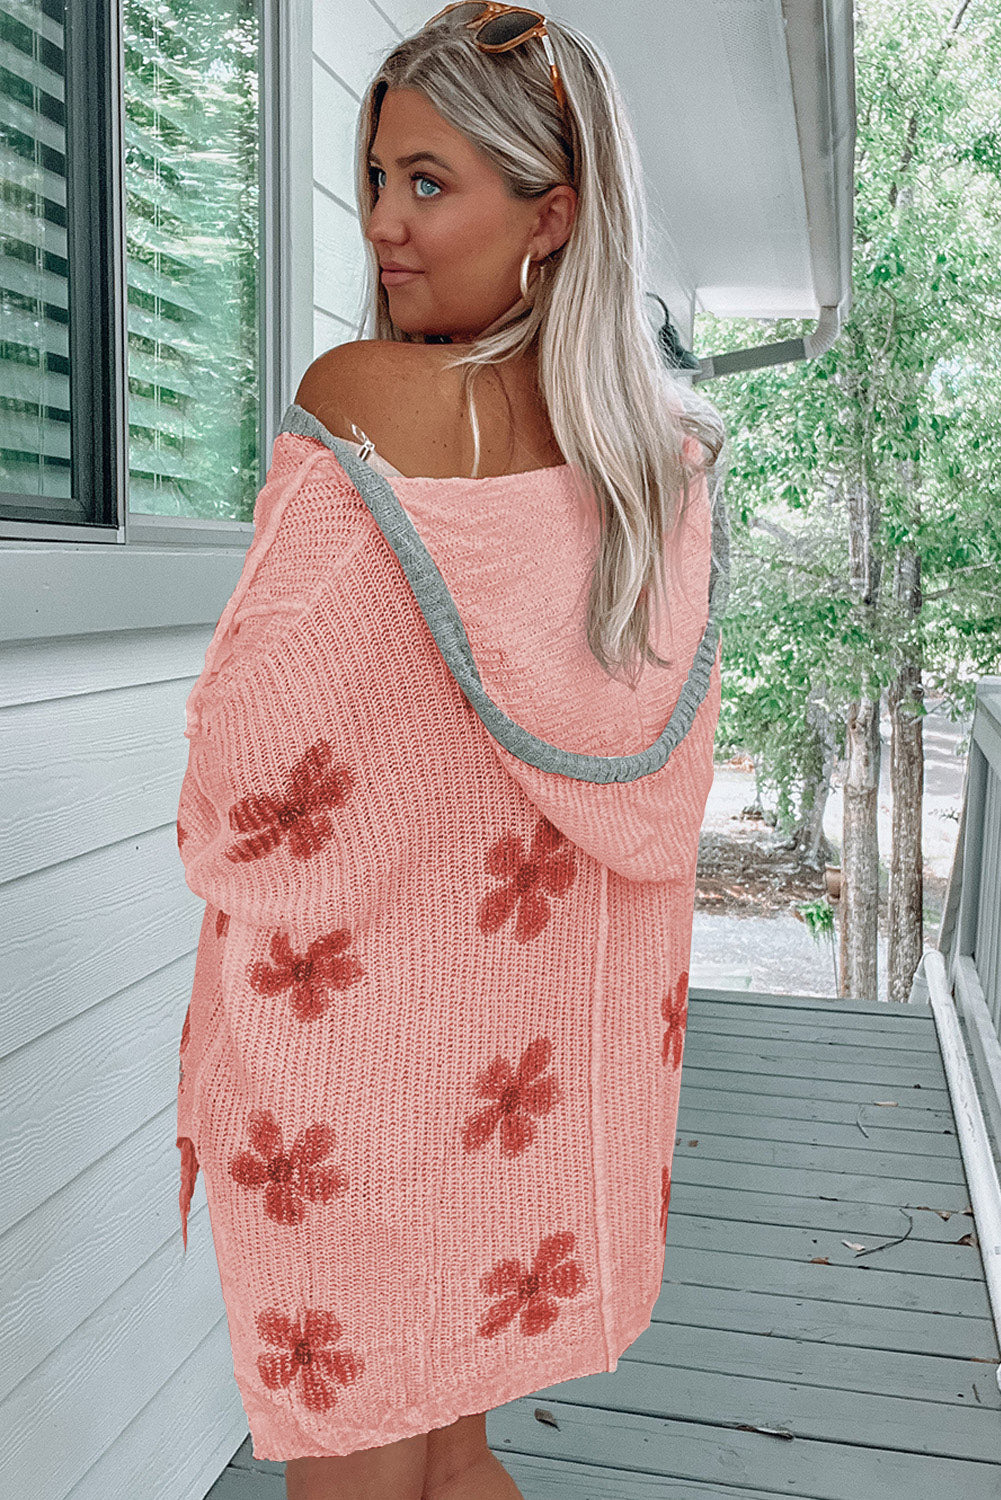 White Floral Print Oversized Knit Hooded Sweater